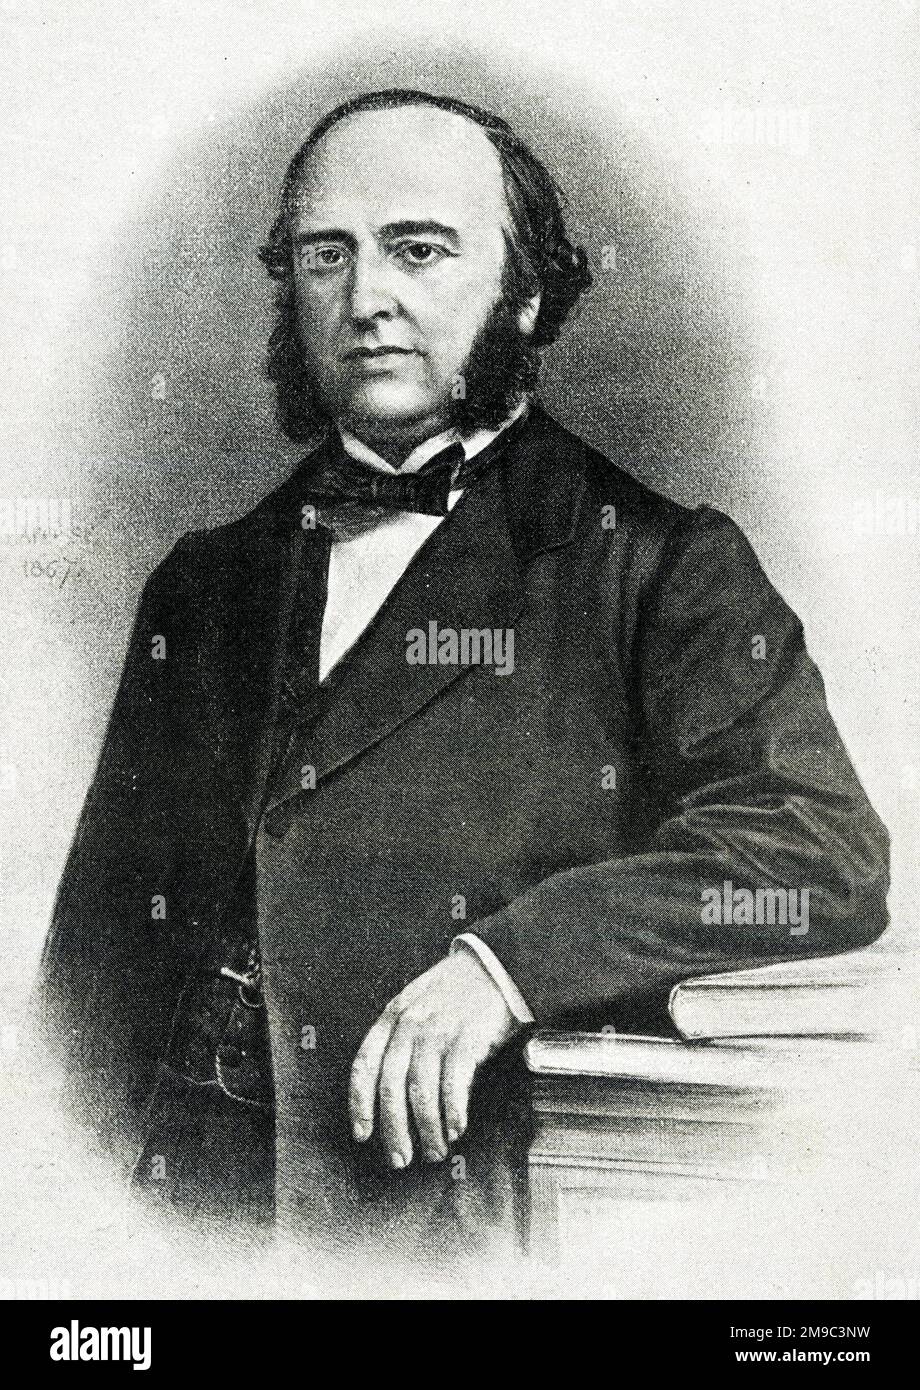 Dr Paul Broca (1824-1880), French physician, anatomist and anthropologist, researcher on the area of the brain that deals with language. Stock Photo